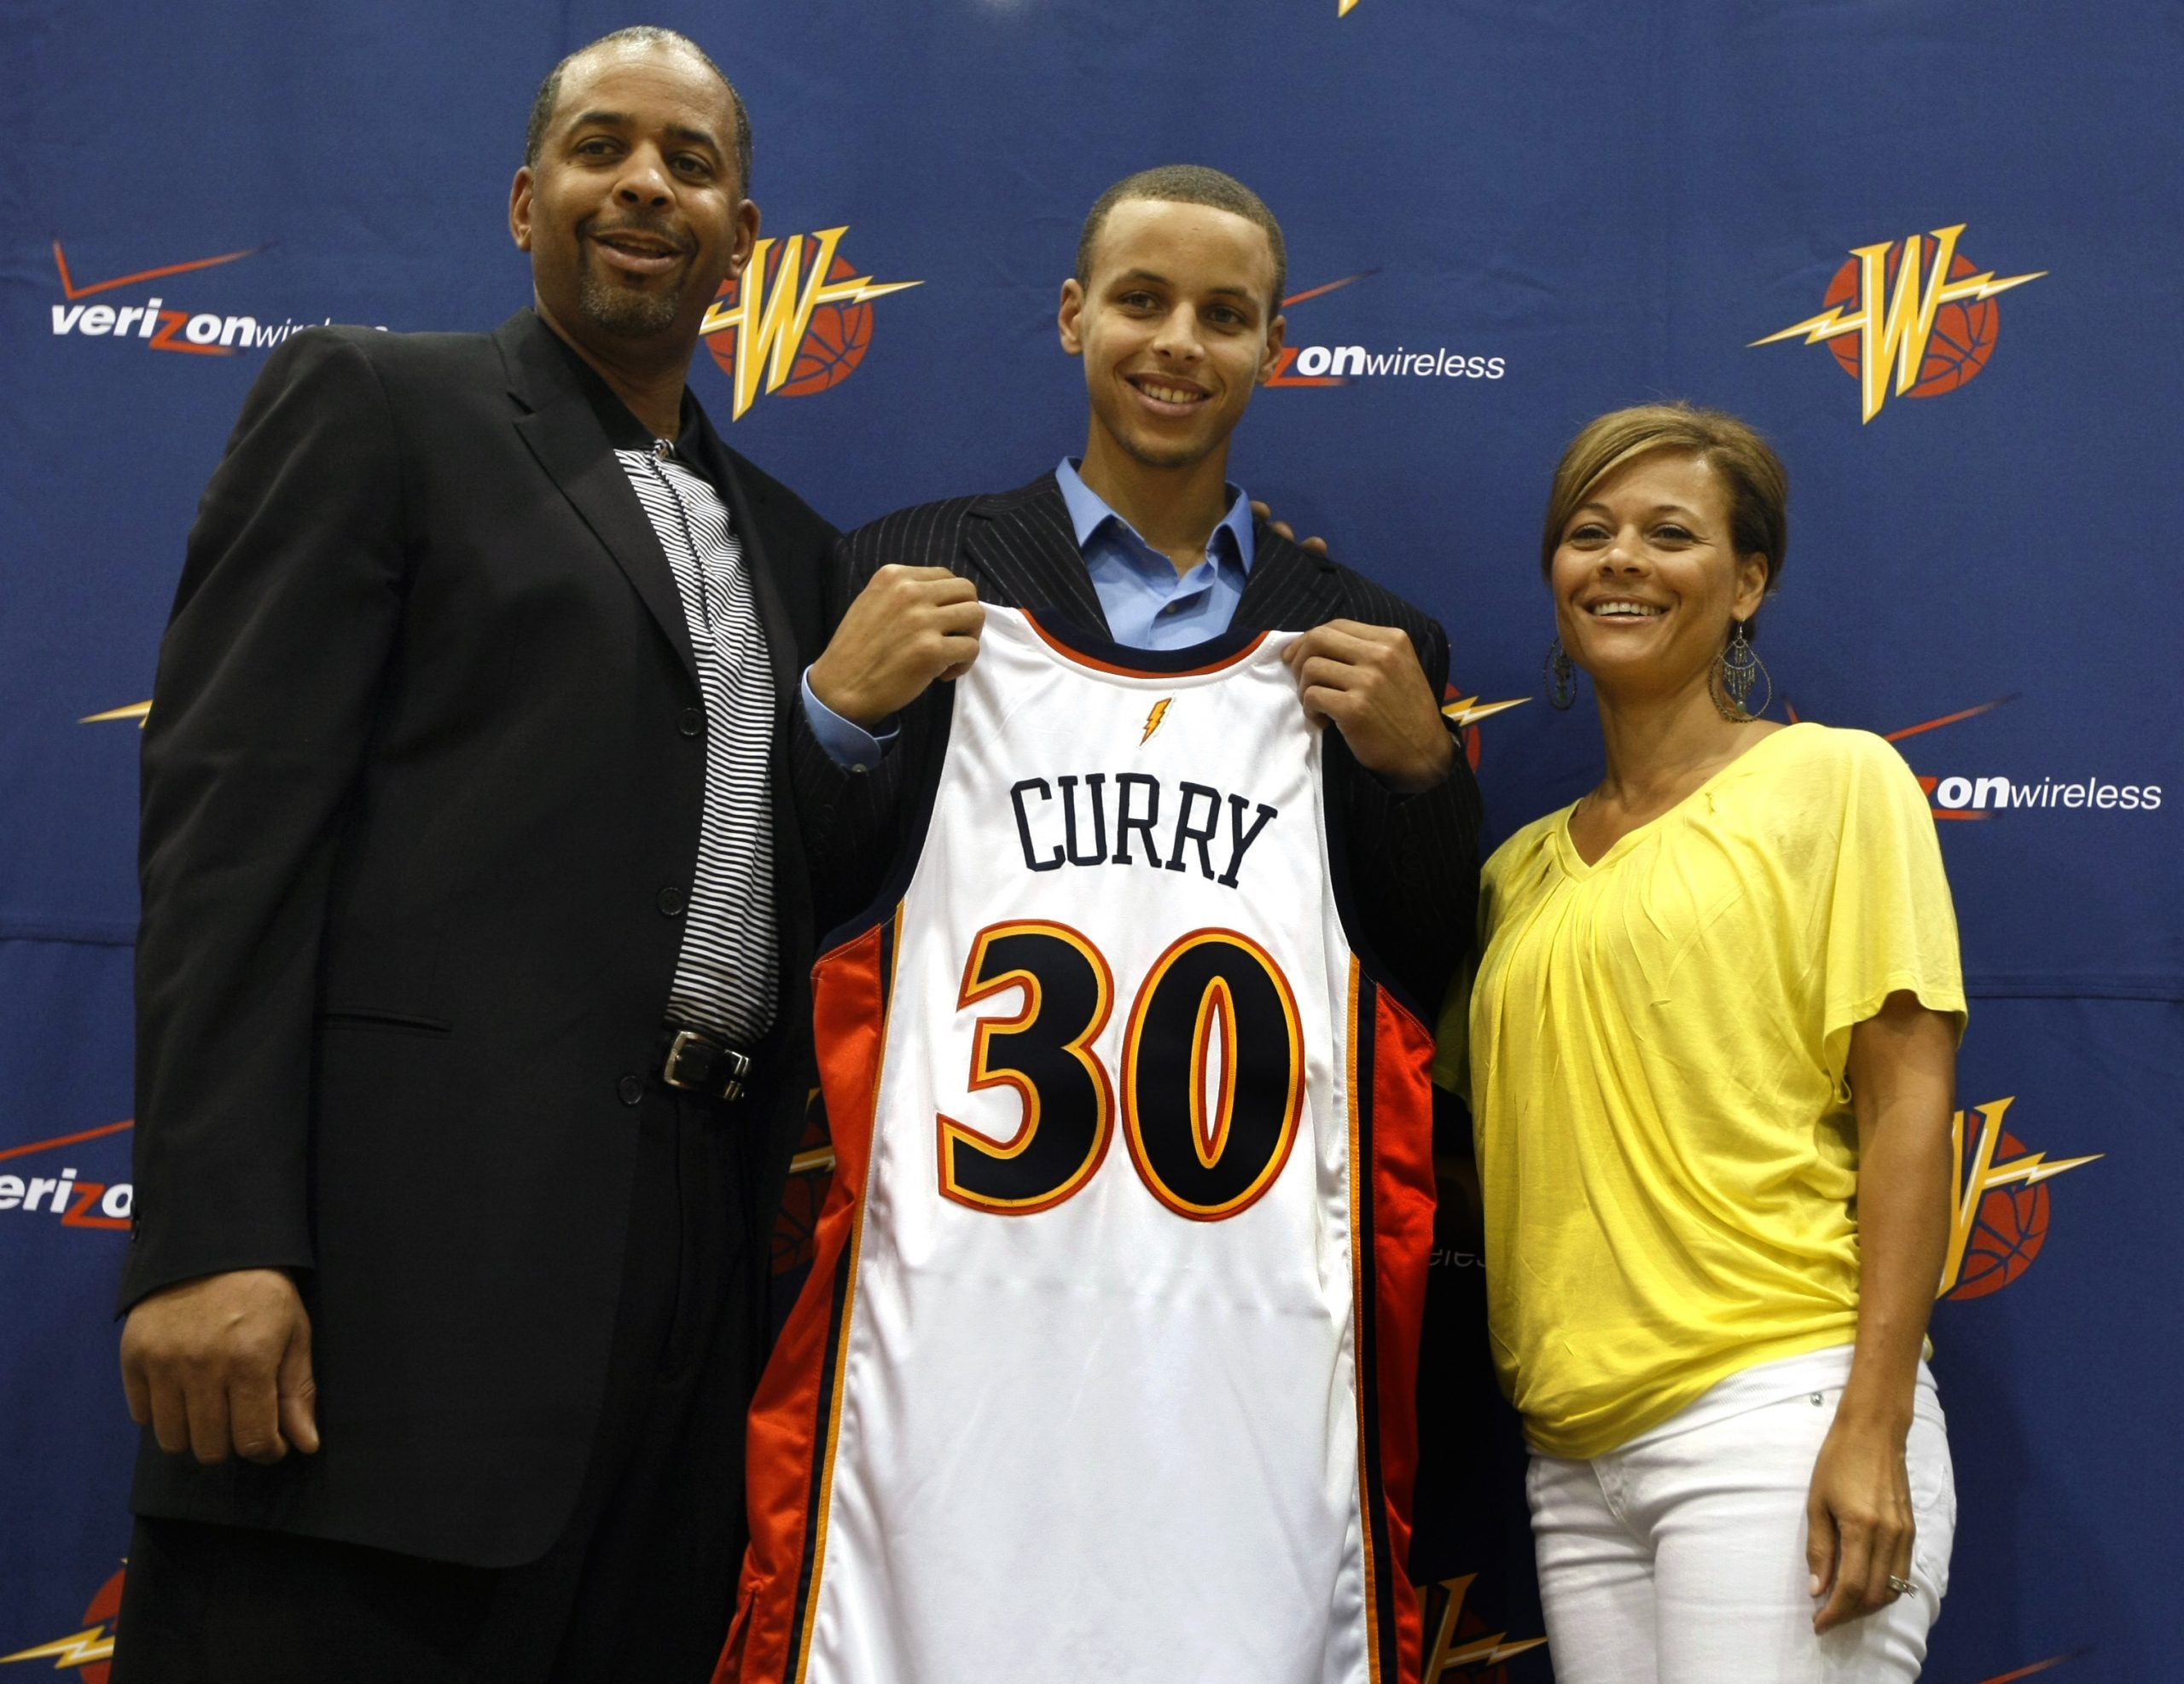 Sonya, the mother of millionaire Stephen Curry, discusses her challenging upbringing and the valuable life lessons it imparted to her